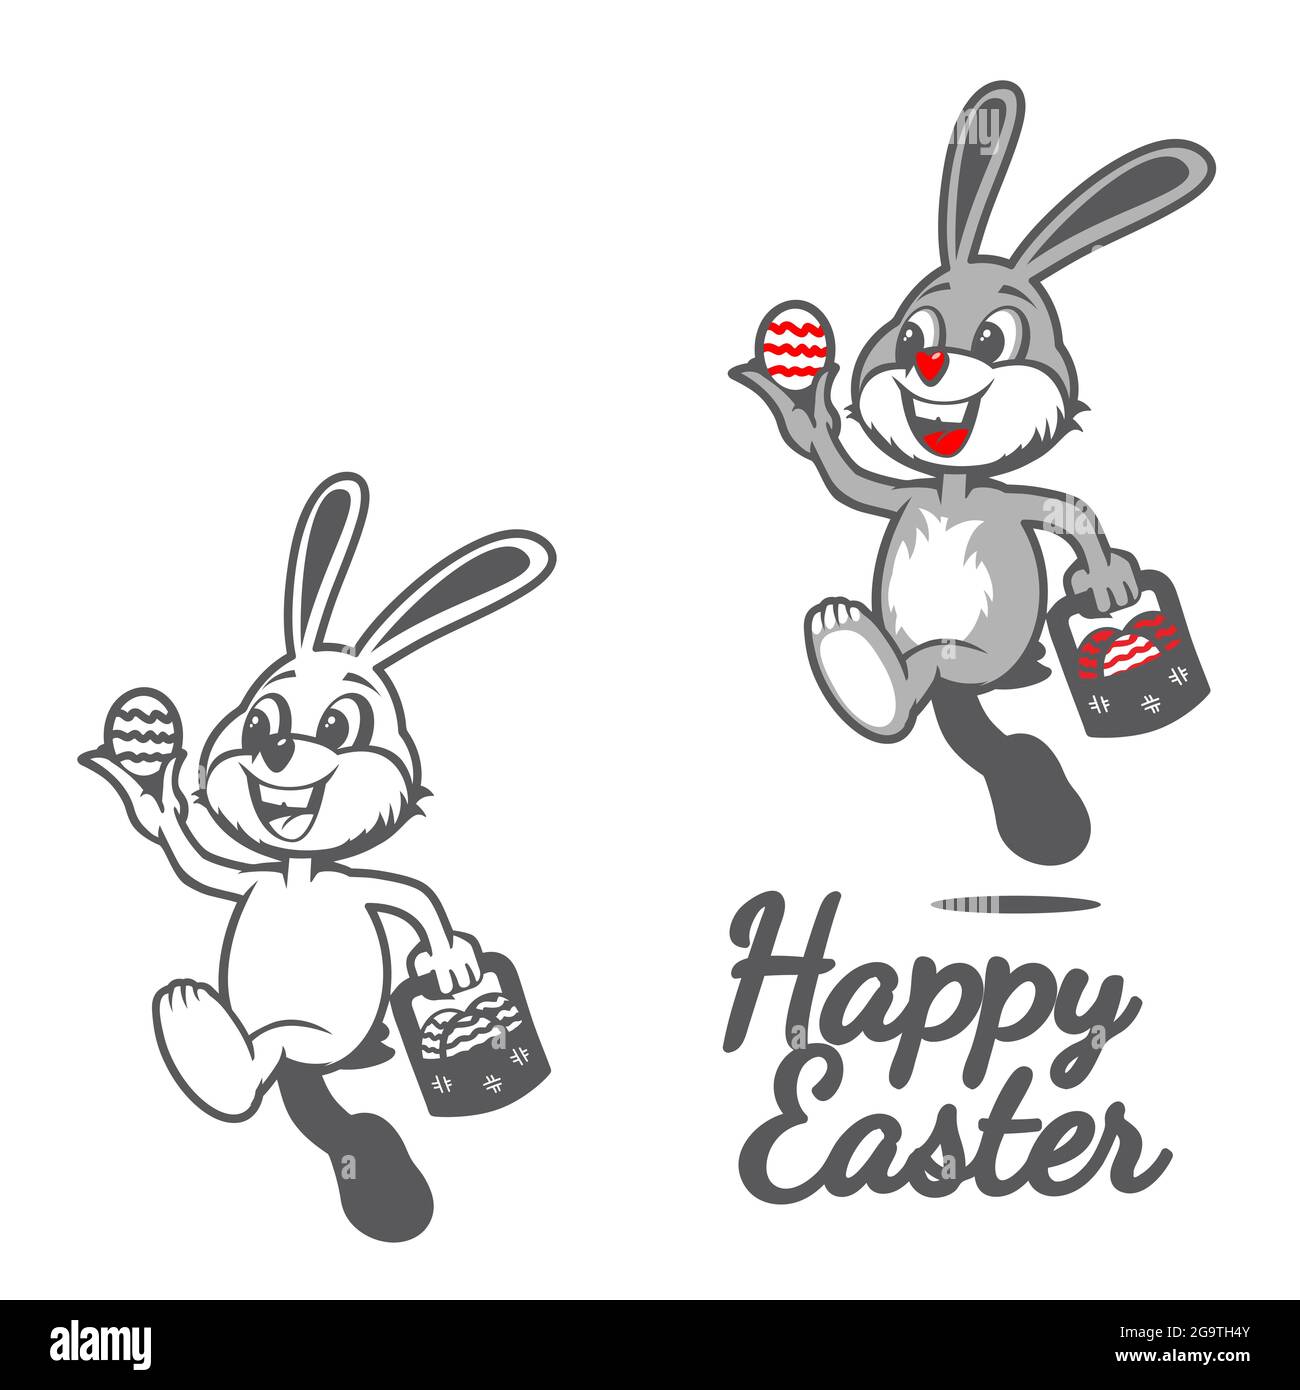 Happy Easter Bunny holding easter egg vector symbol illustration, for greeting card, tshirt print, desugn element or any other purpose Stock Vector